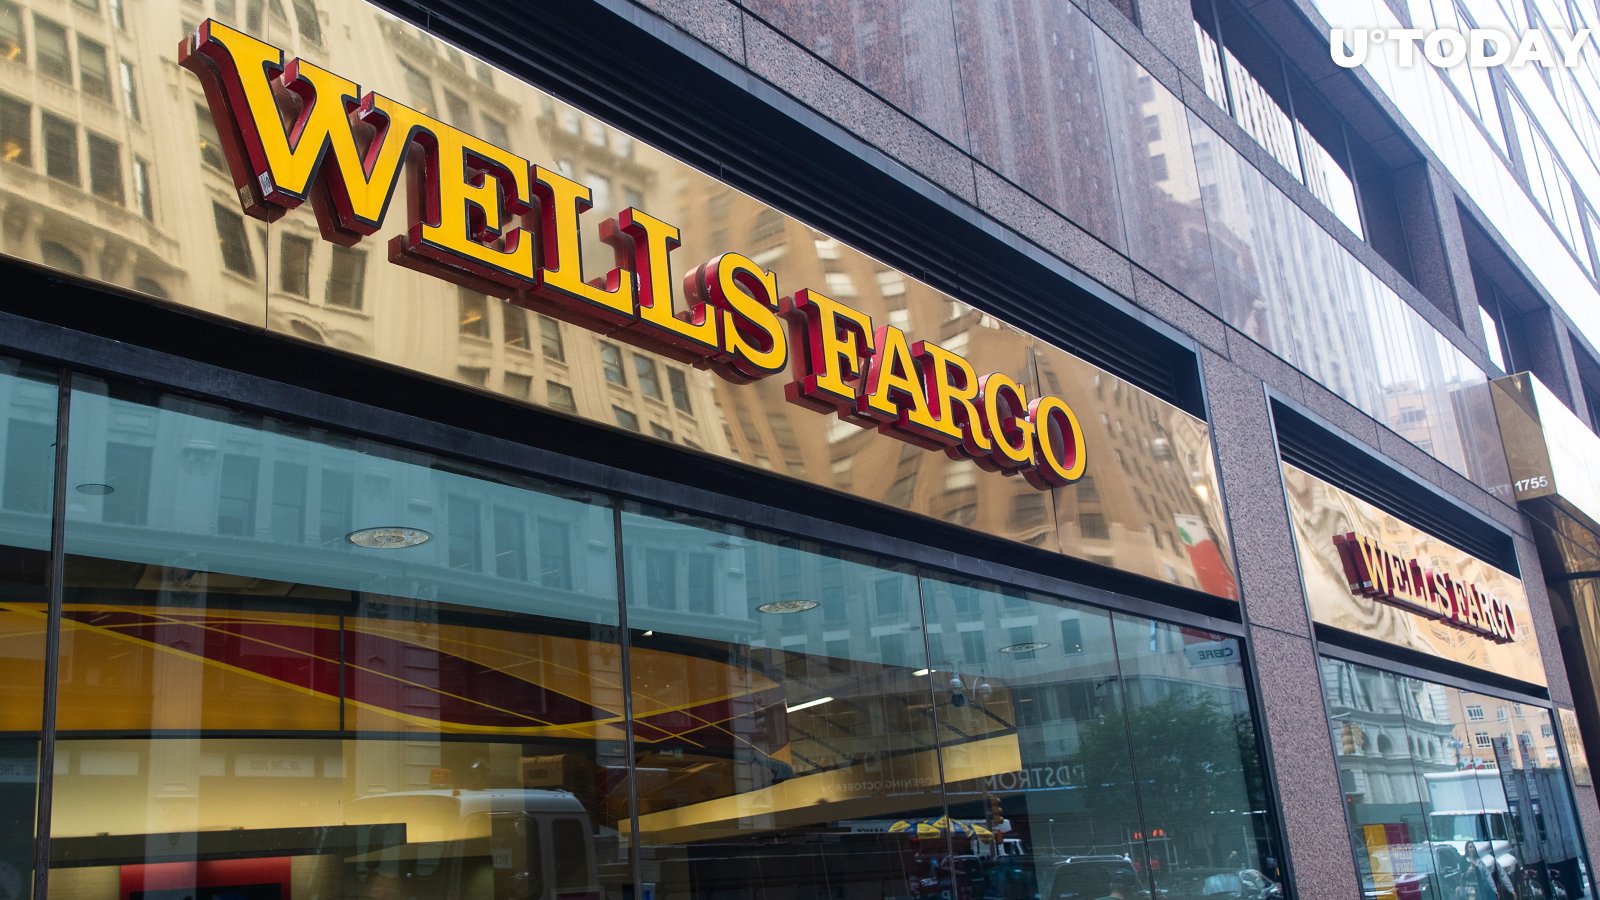 BREAKING: Wells Fargo Becomes Latest Banking Giant to Make Foray Into Crypto